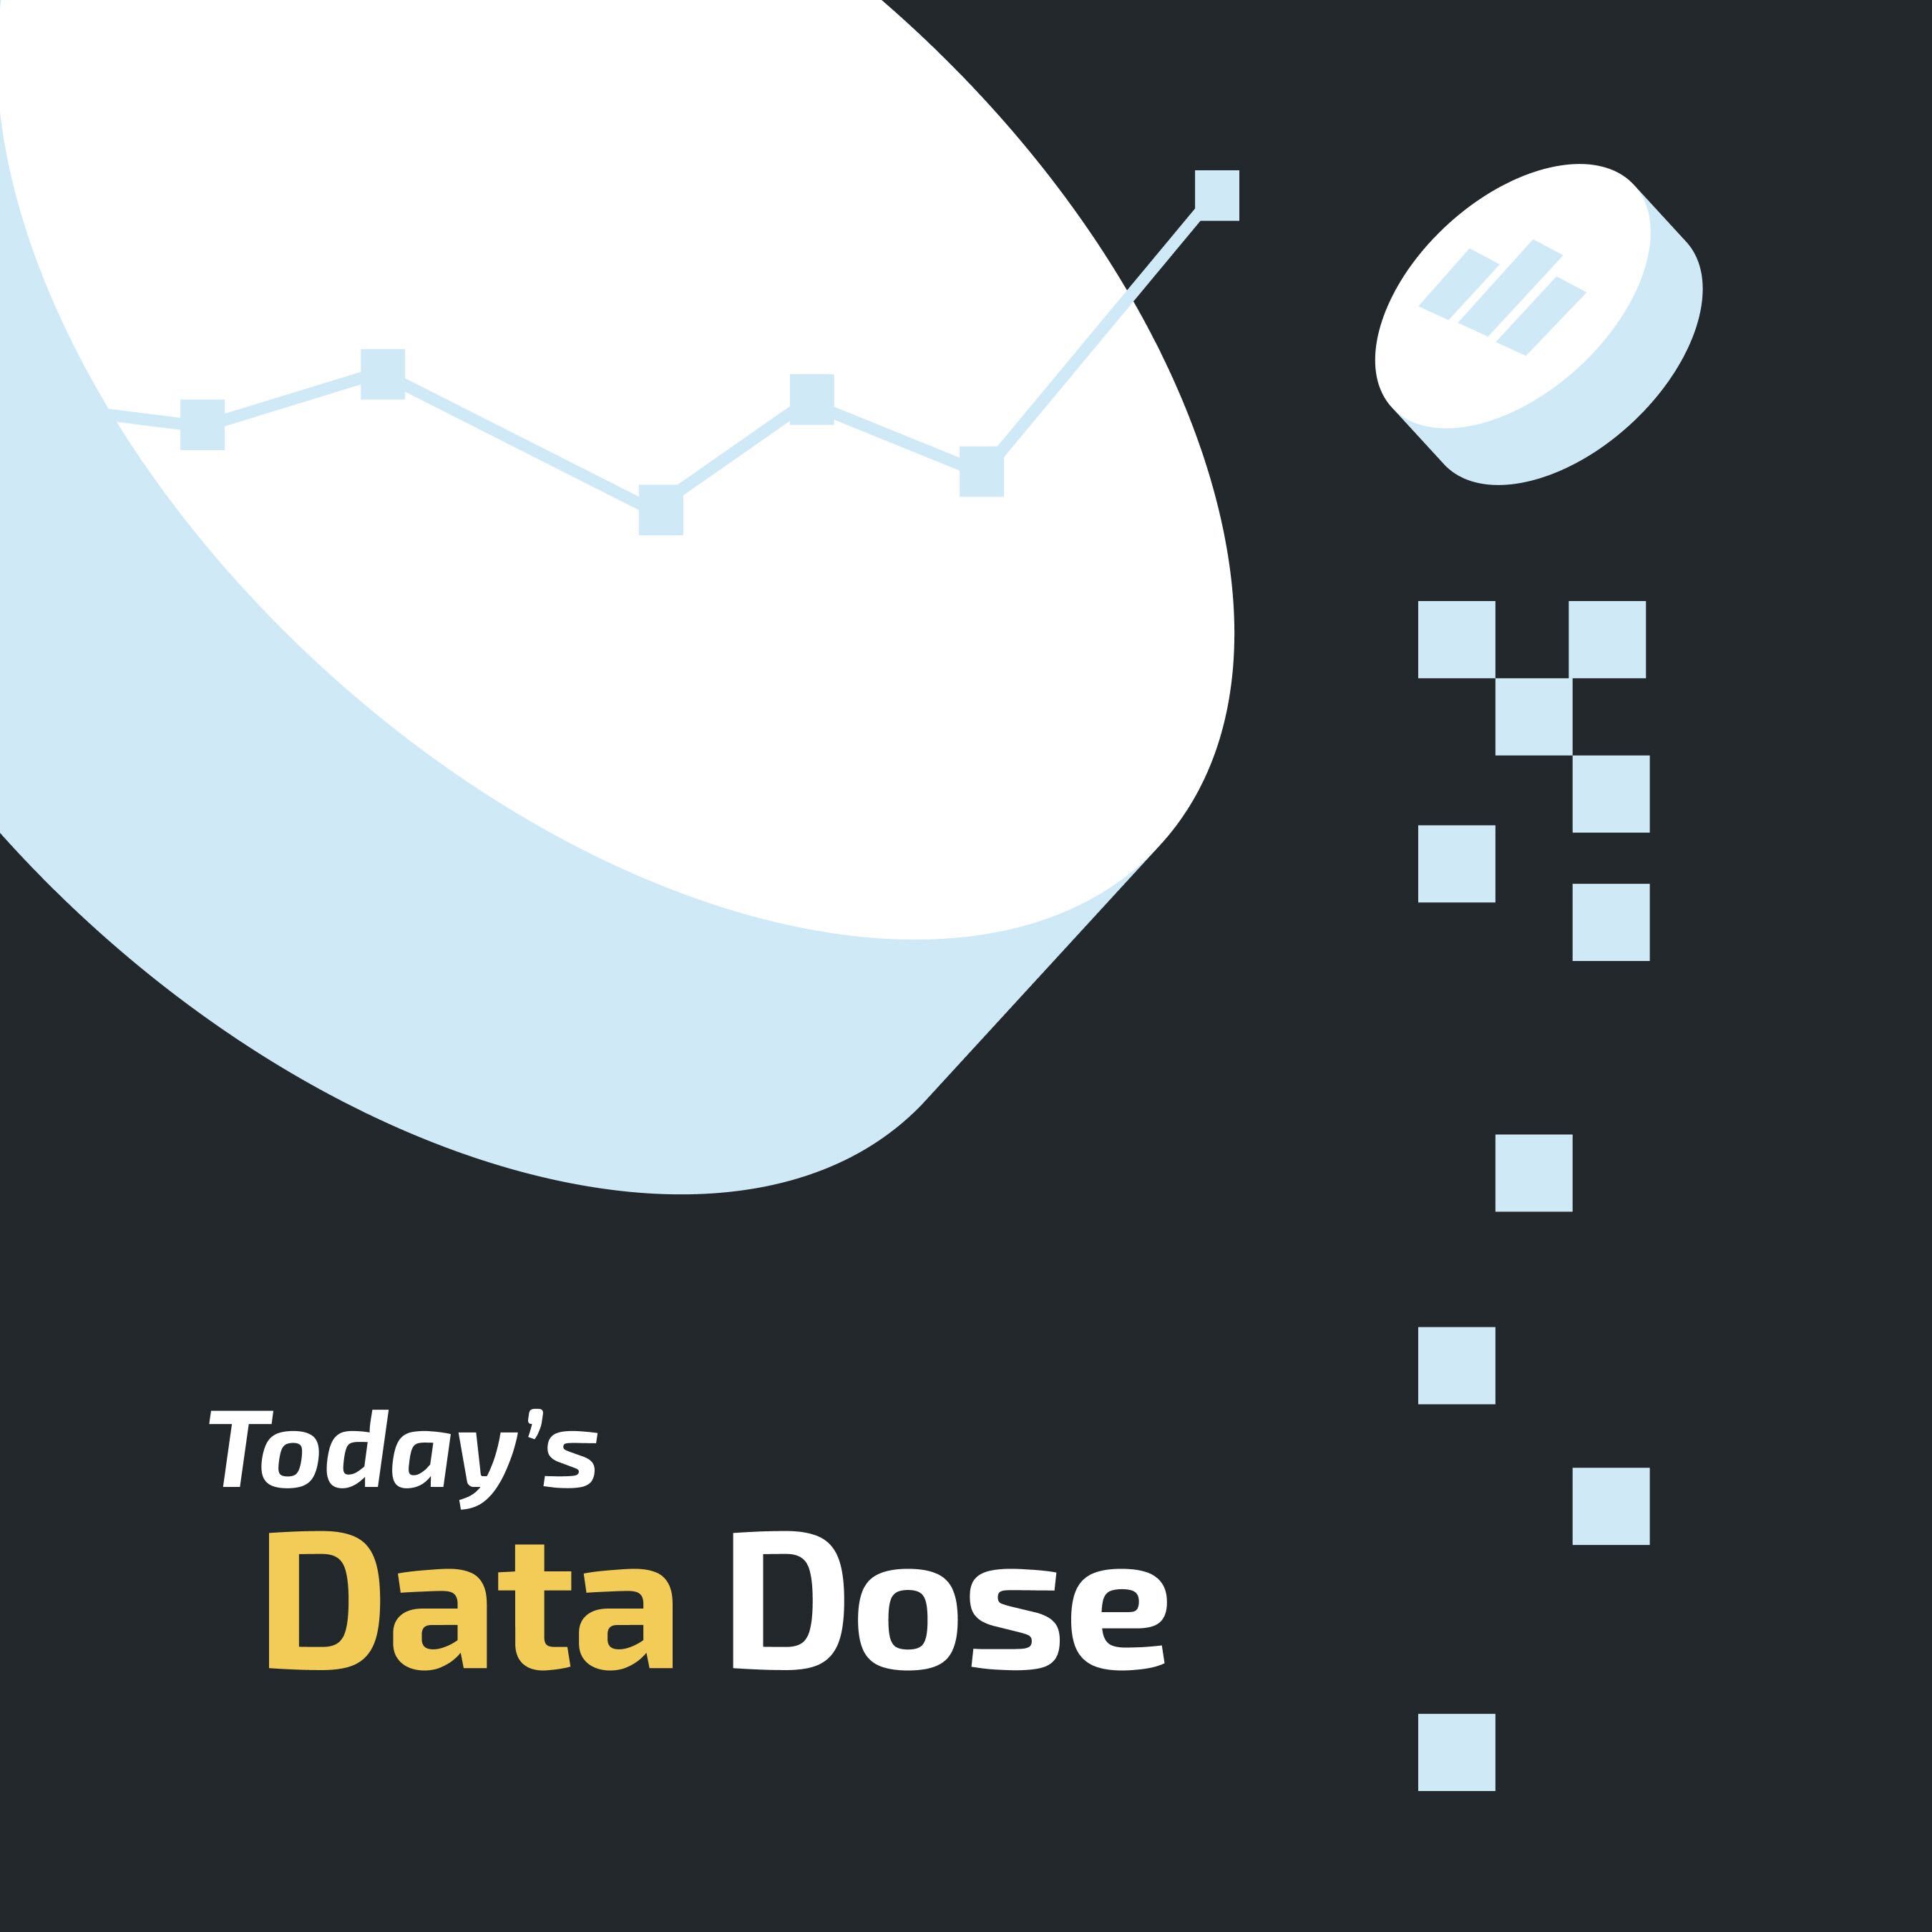 Introducing: Today’s Data Dose